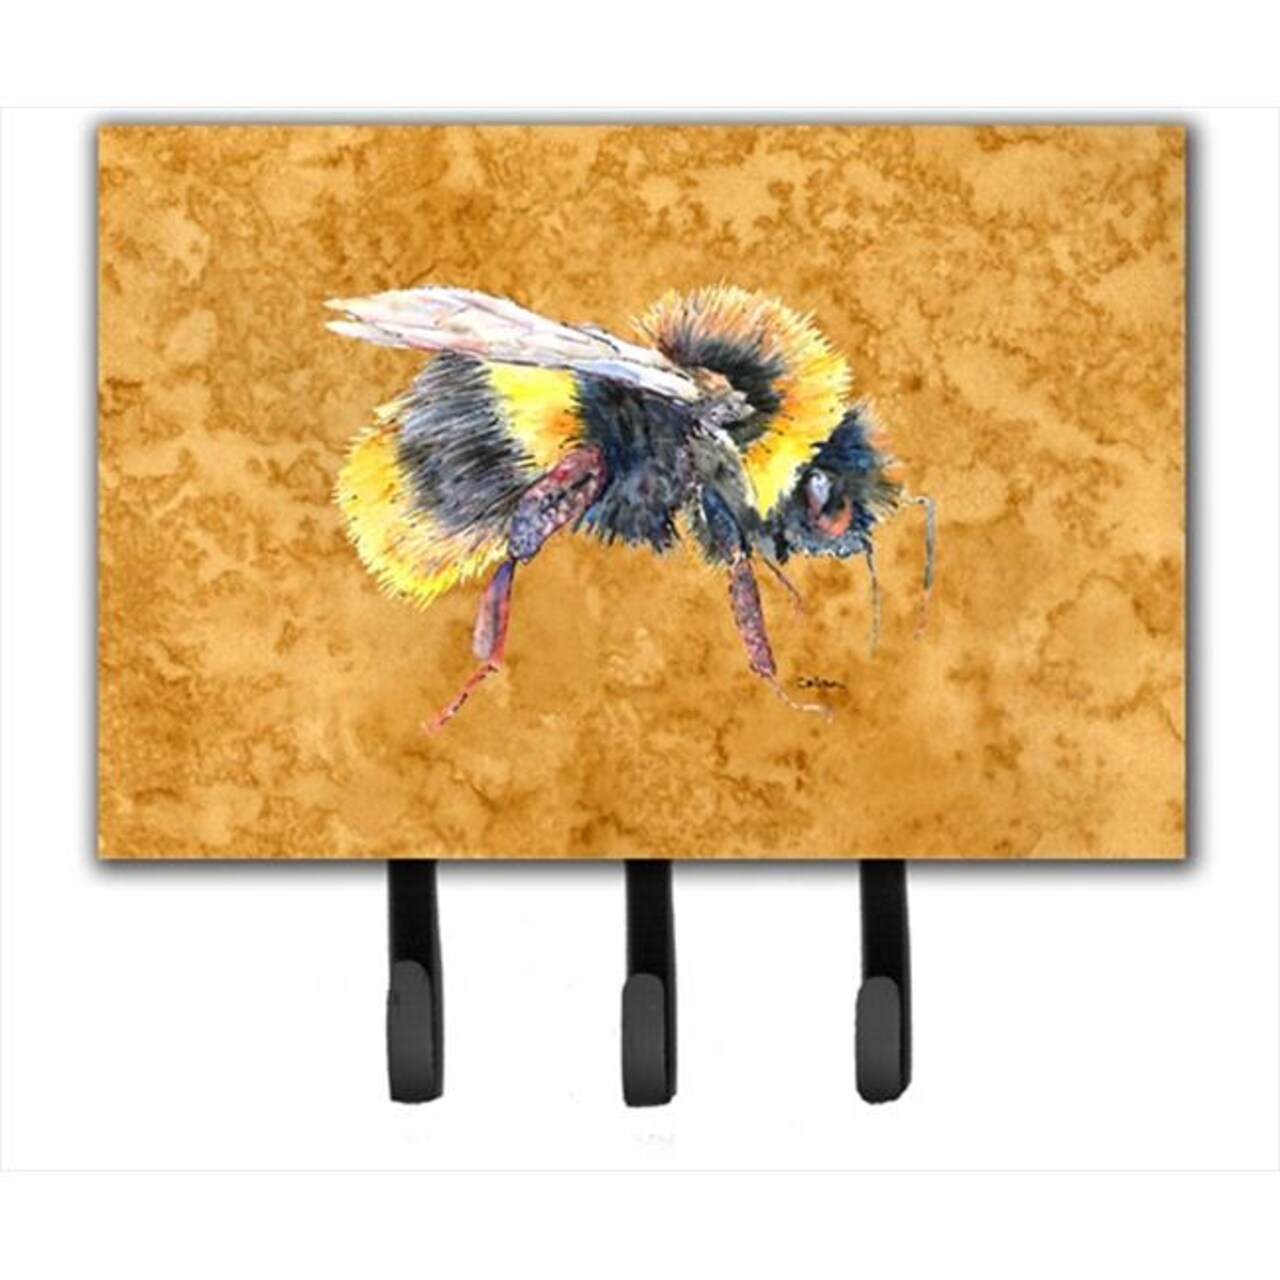 Carolines Treasures 8850TH68 6 x 9 In. Bee on Gold Leash or Key Holder